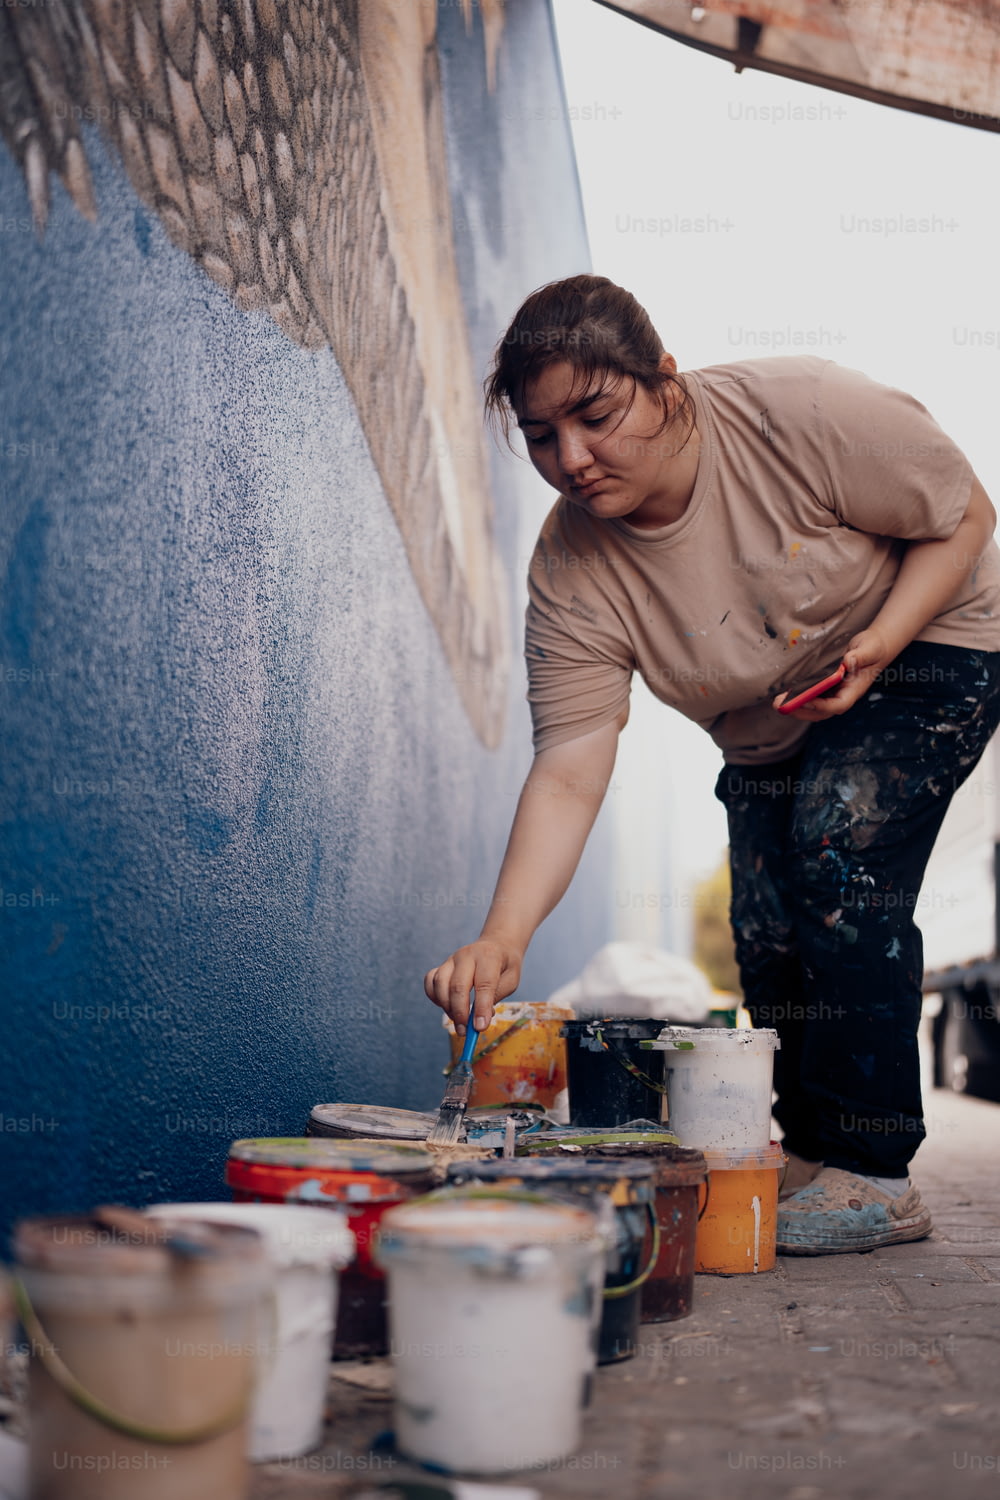 a woman is painting a wall with paint cans